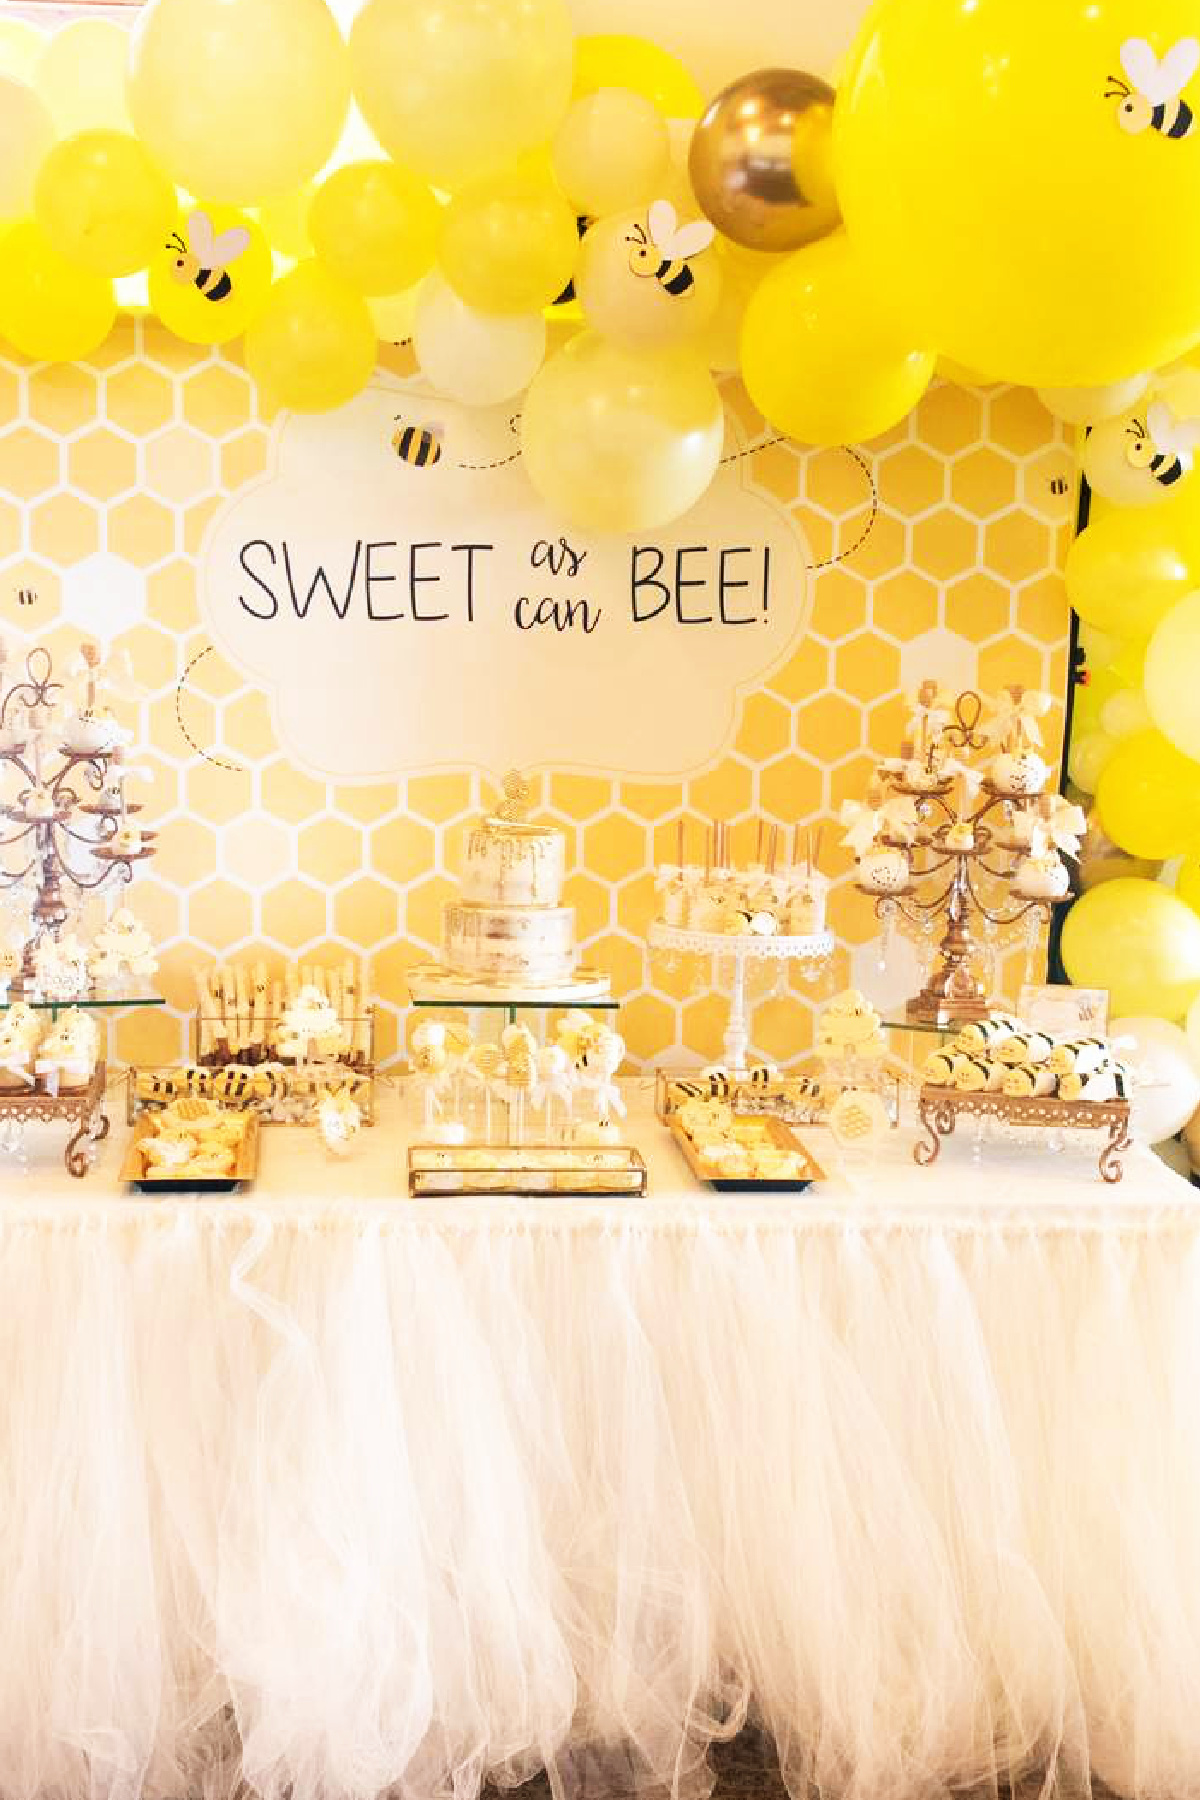 Bumble Bee-Themed Baby Shower